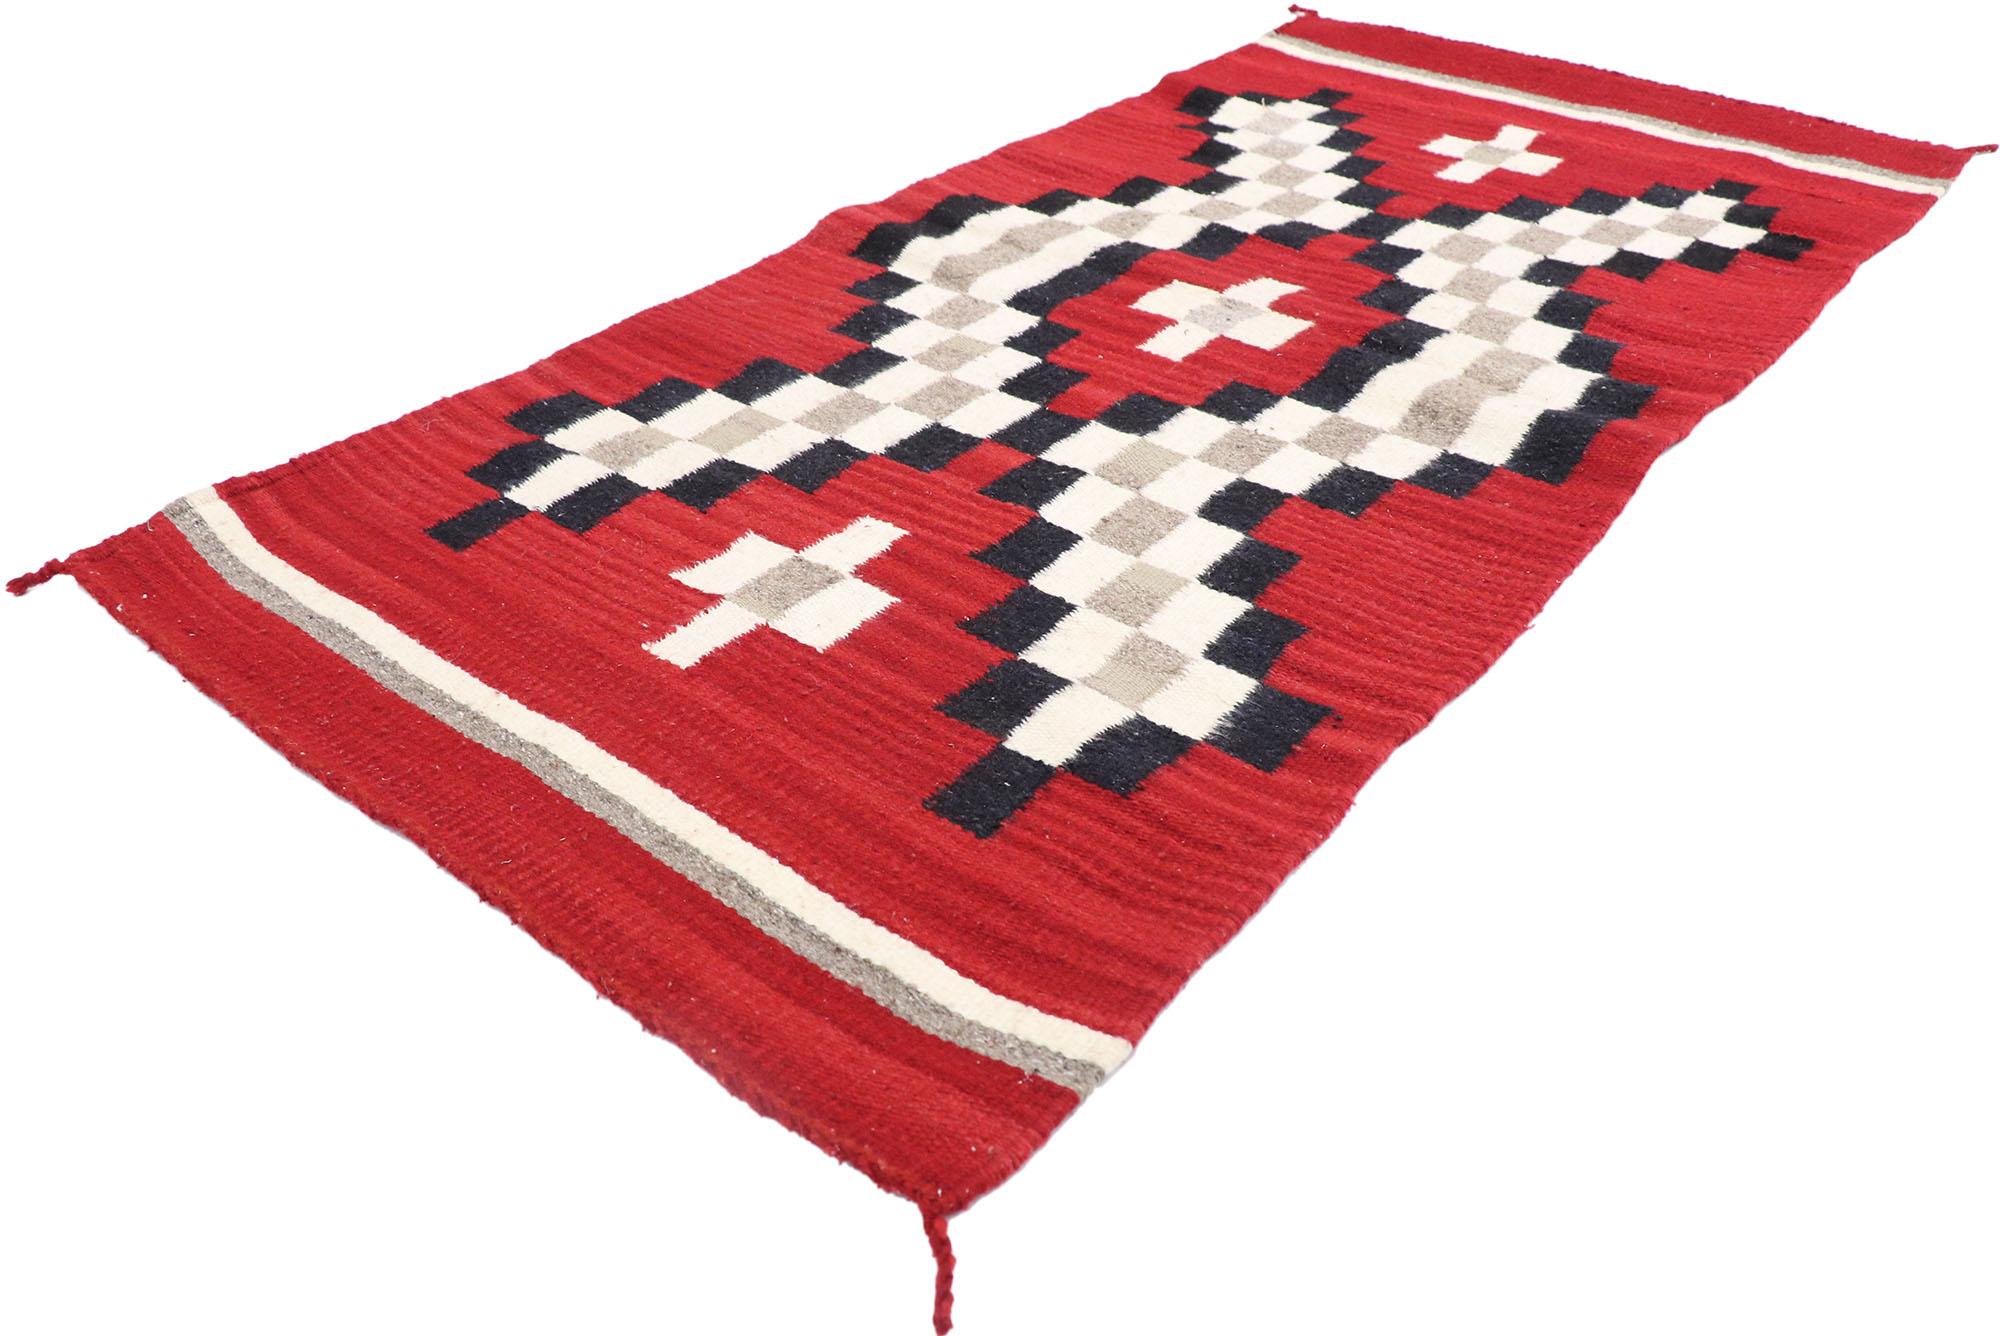 77958 vintage Navajo Kilim Rug with two grey hills style 02'05 x 04'11. With its bold expressive design, incredible detail and texture, this hand-woven wool vintage Navajo Kilim rug is a captivating vision of woven beauty highlighting Native